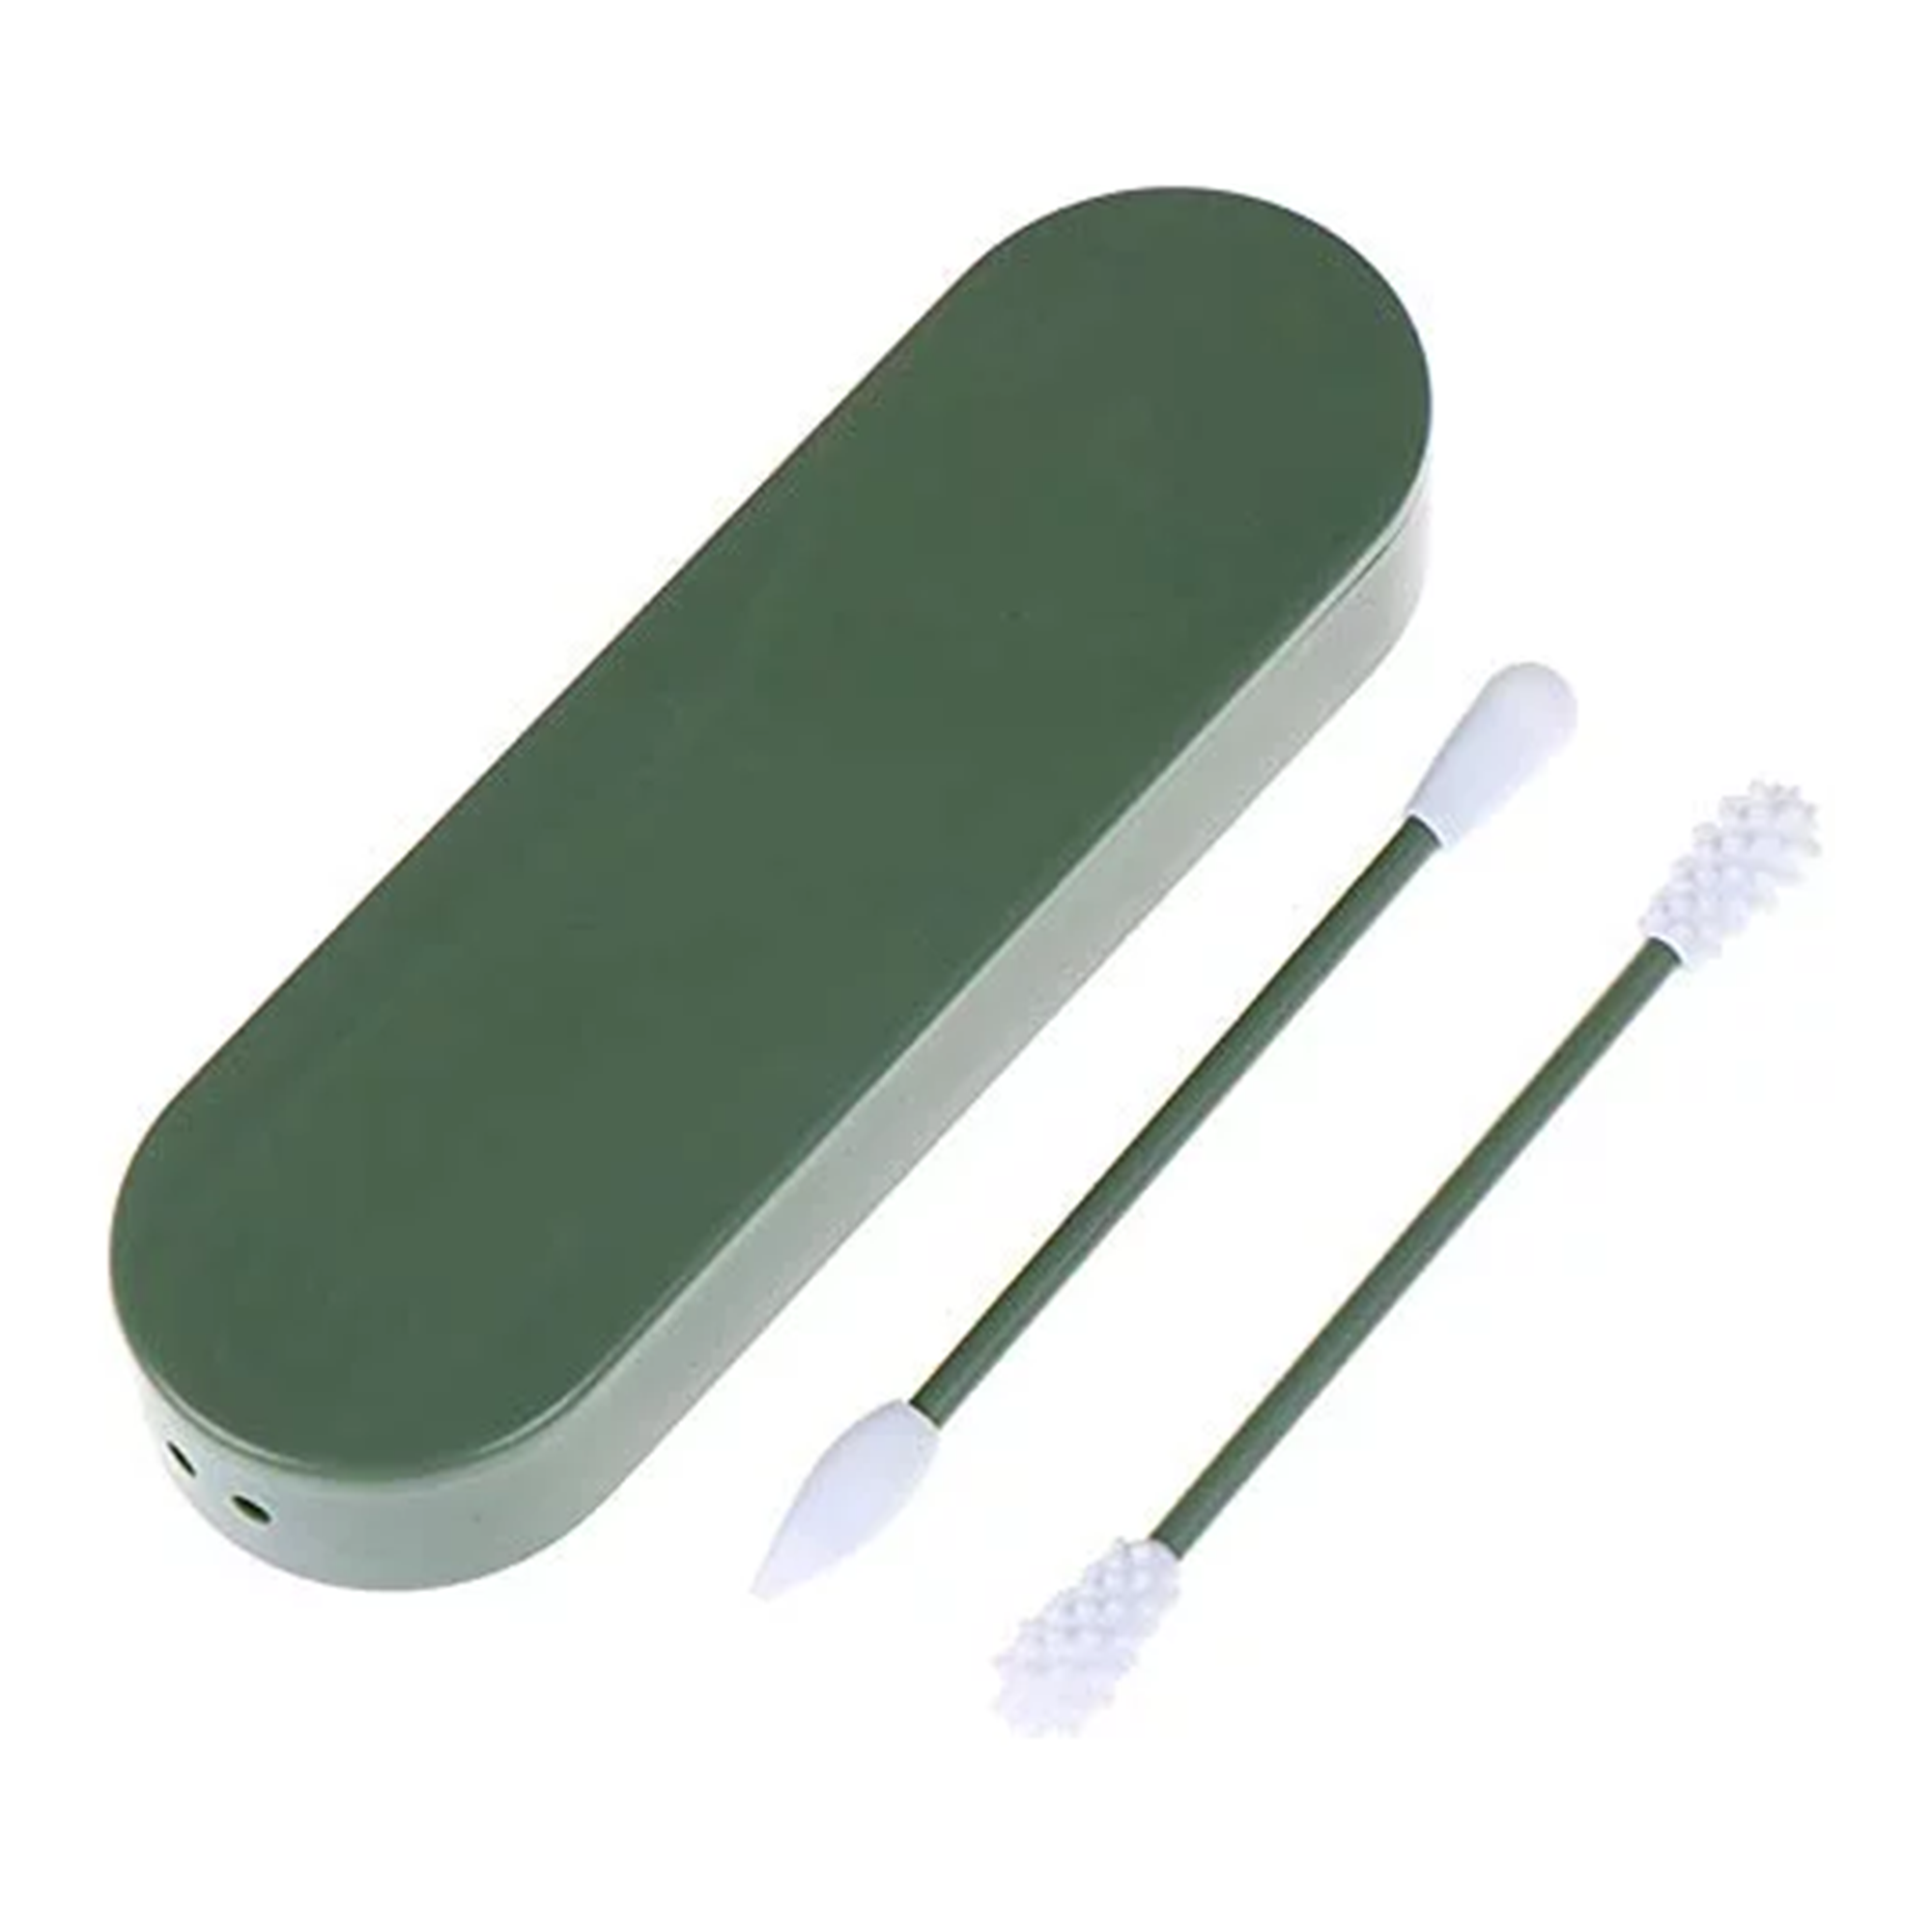 Reusable Silicone Cotton Swab -2 Pack